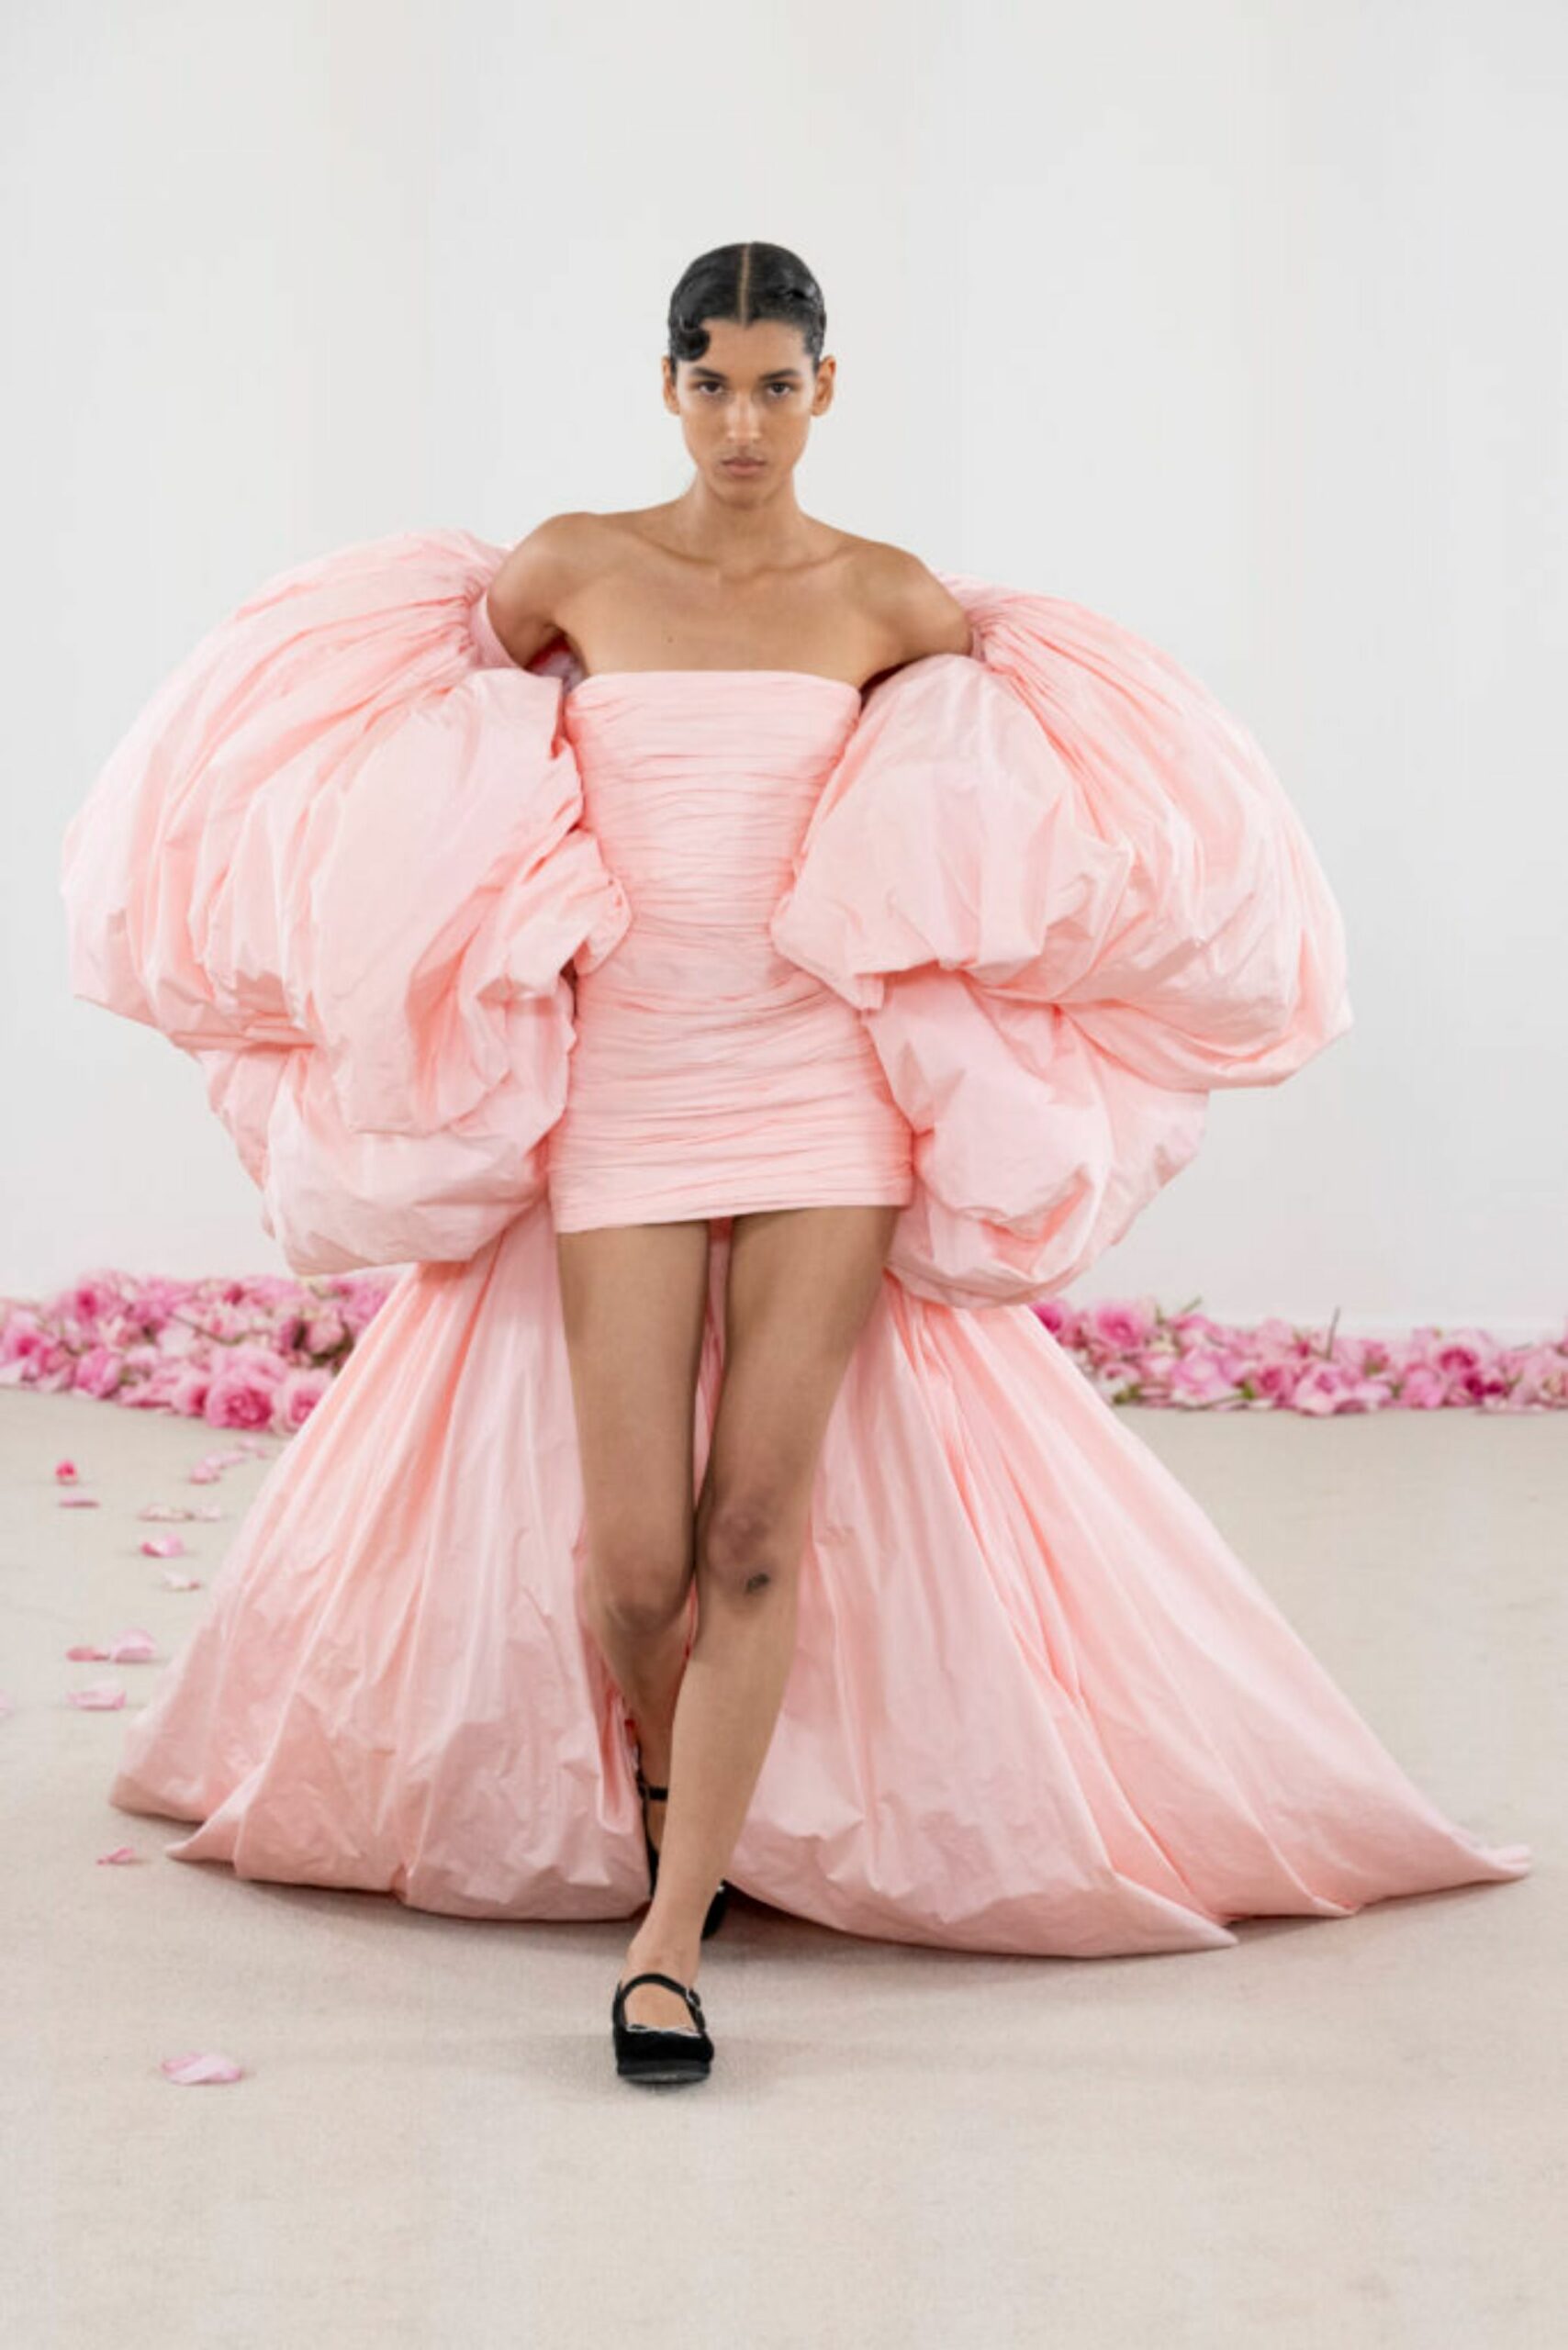 A pink flowing dress from the new Giambattista Valli Haute Couture 25 collection.